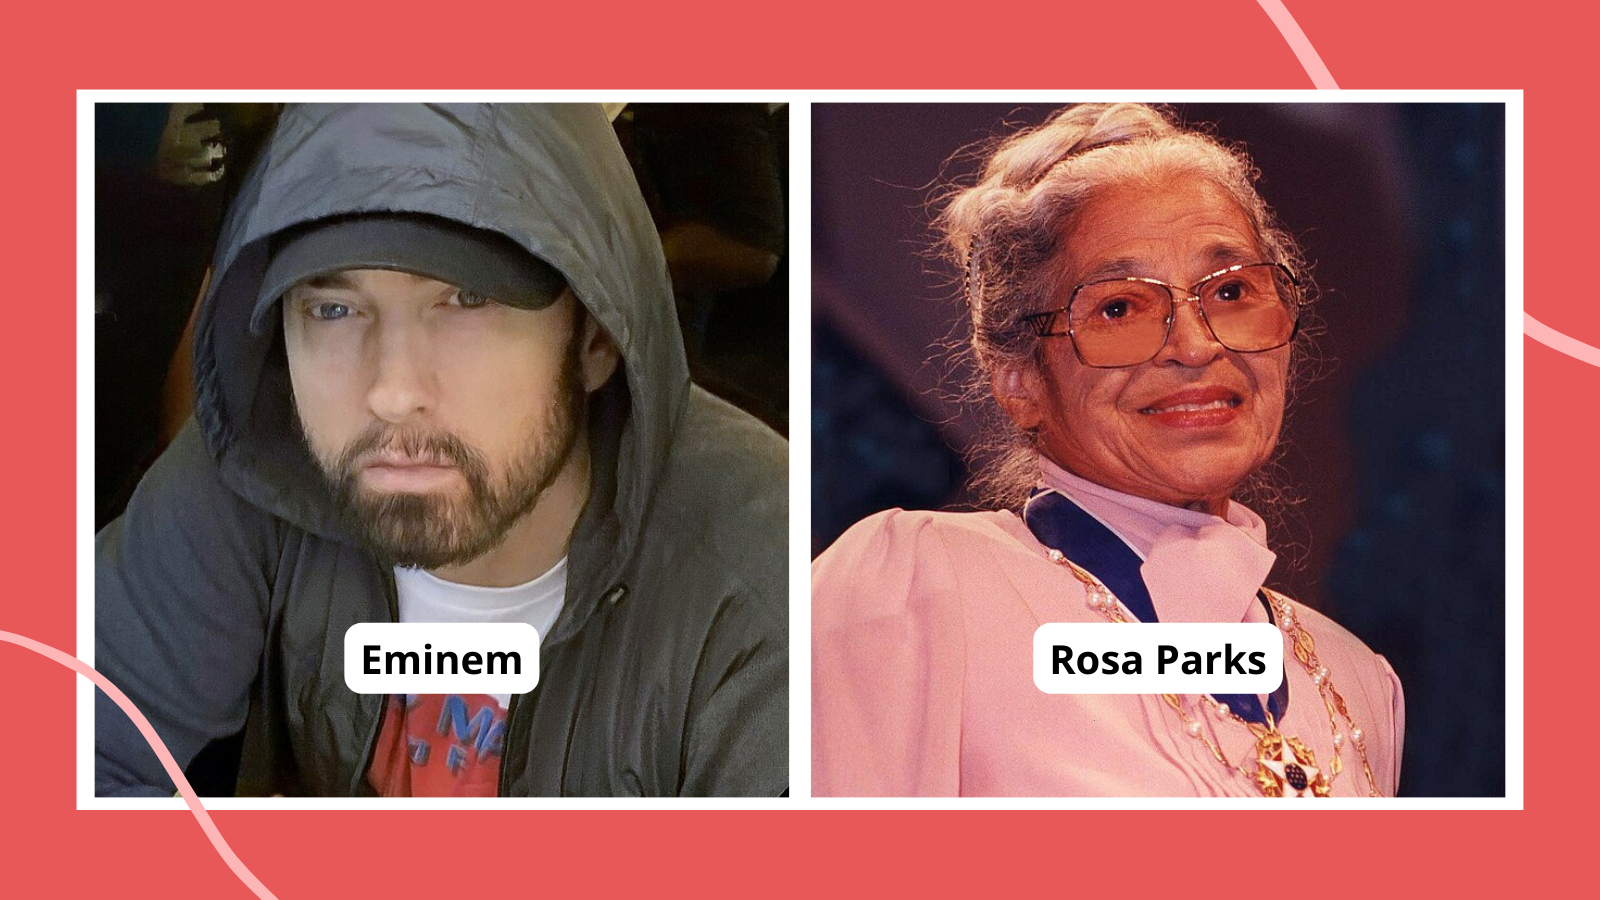 Famous people from Michigan including Eminem and Rosa Parks.